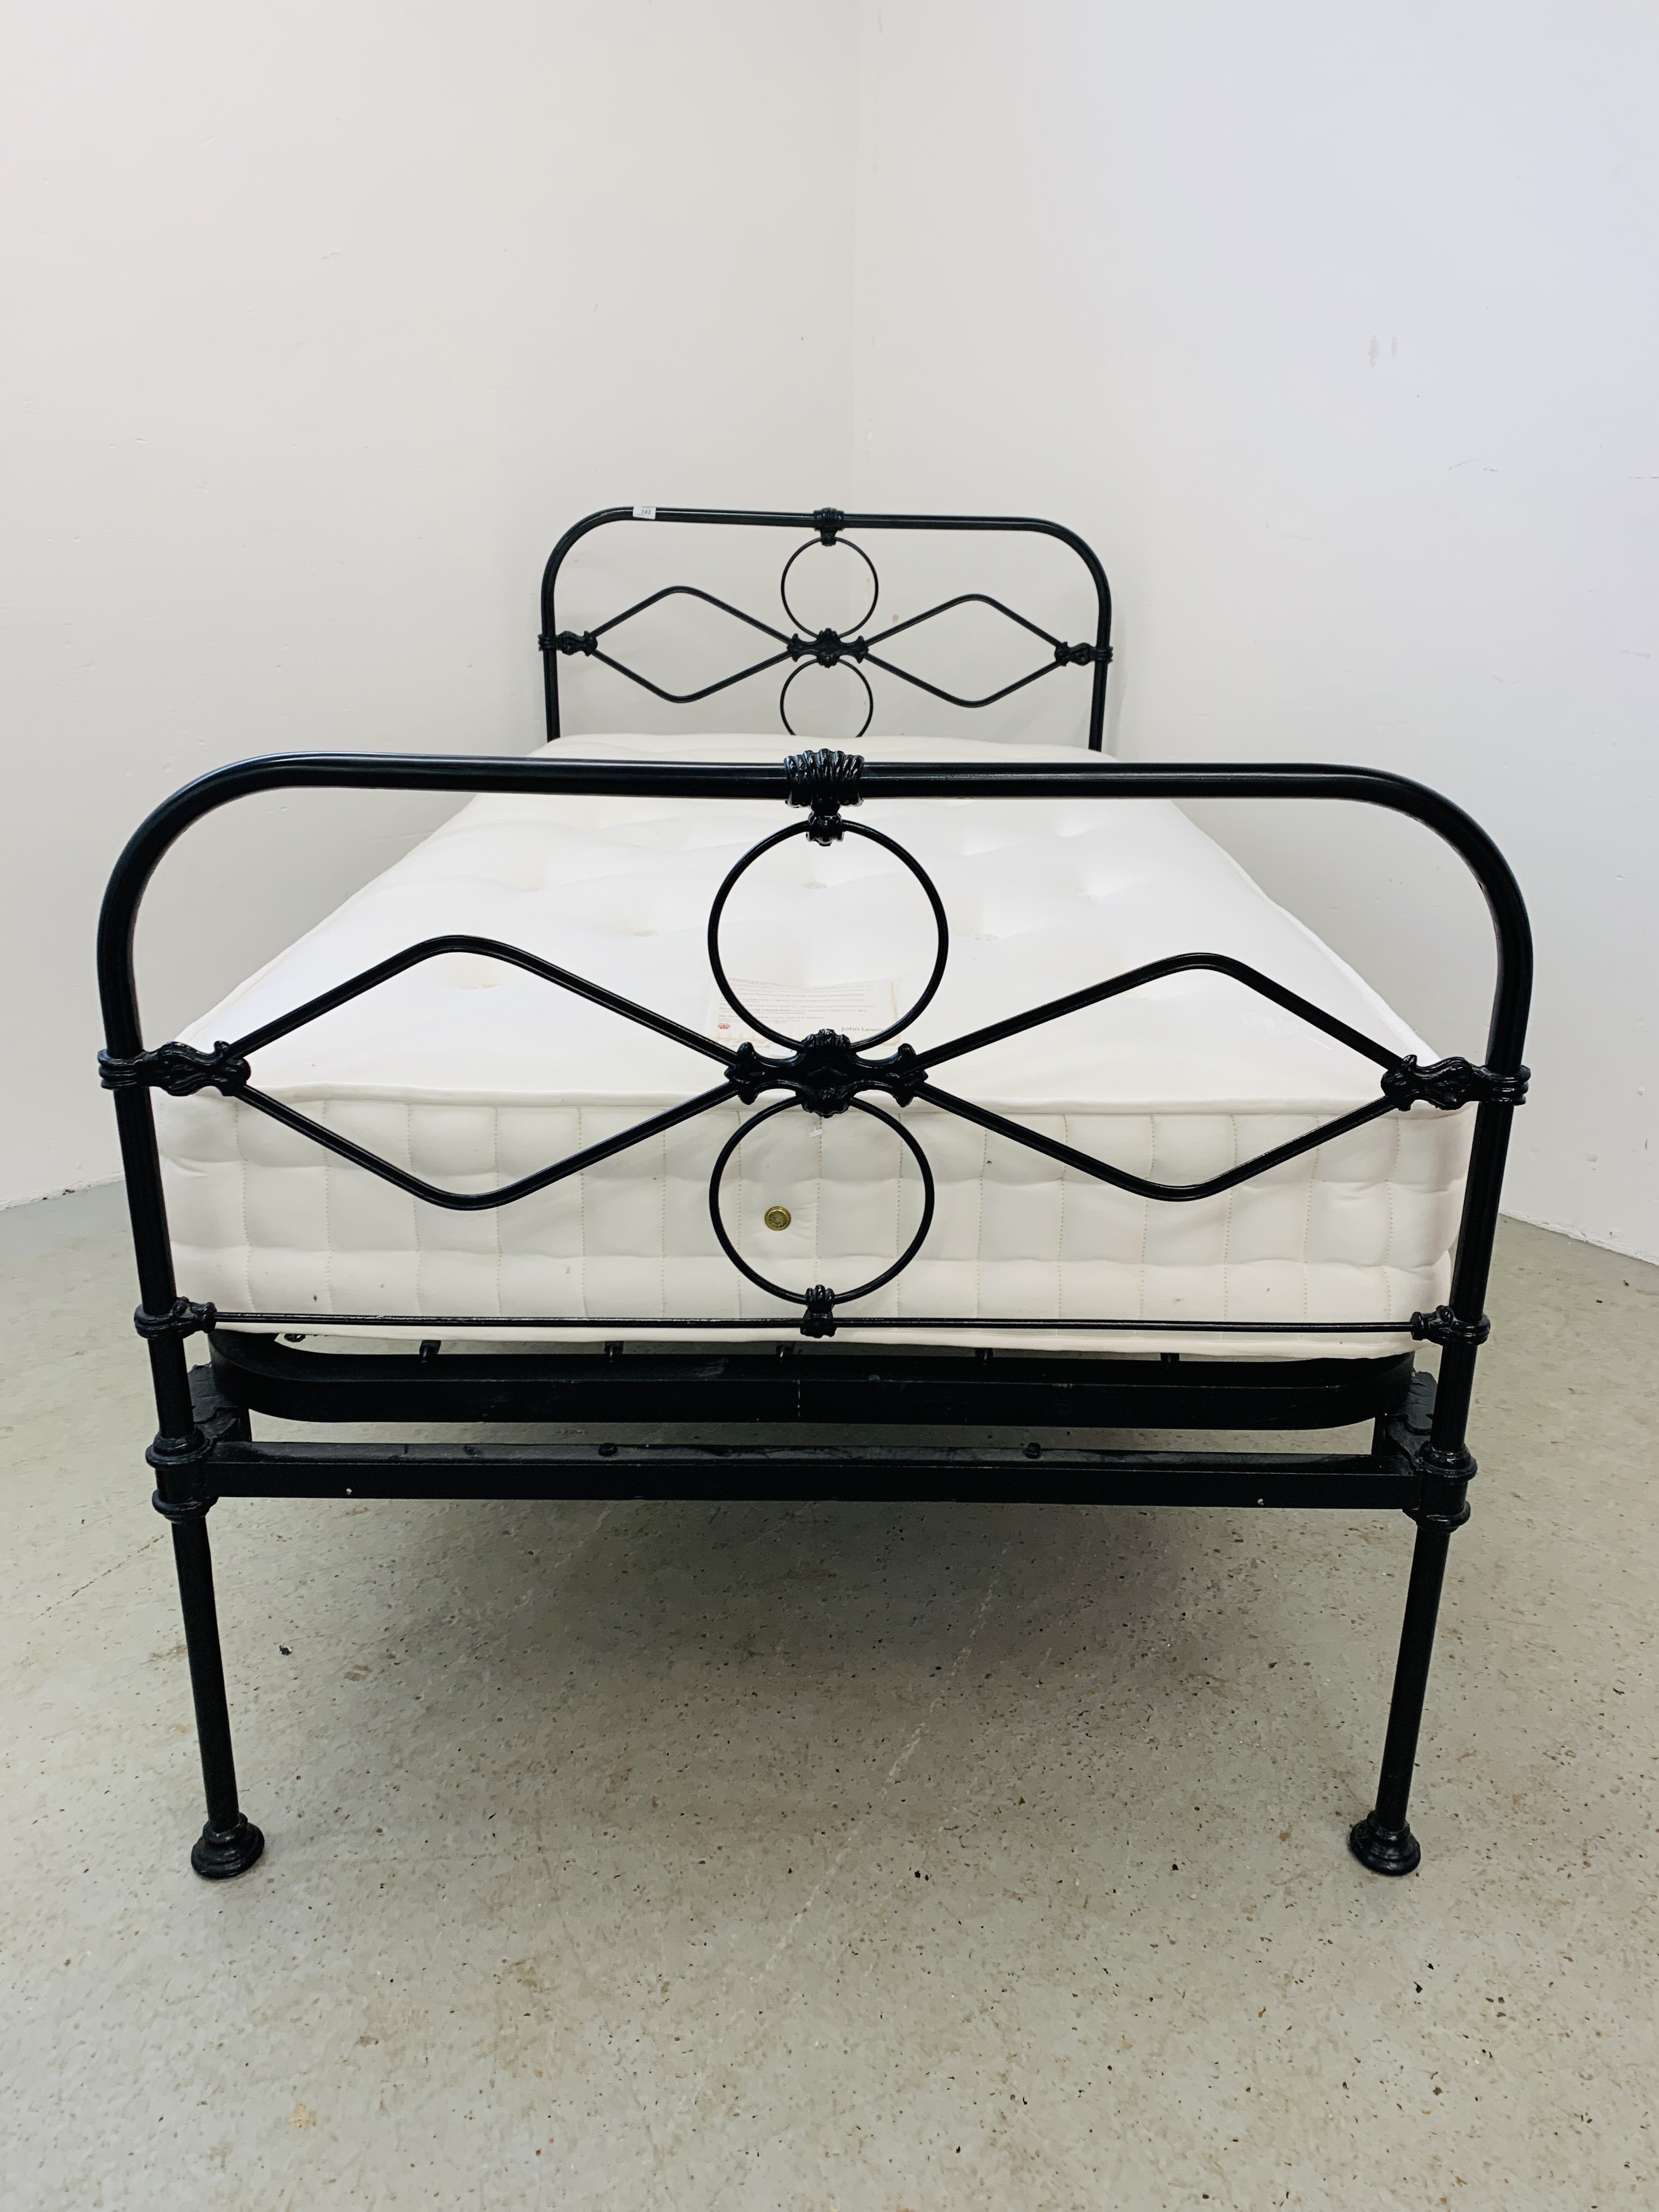 A VICTORIAN STYLE SINGLE IRON FRAMED BEDSTEAD WITH JOHN LEWIS LUXURY MATTRESS.